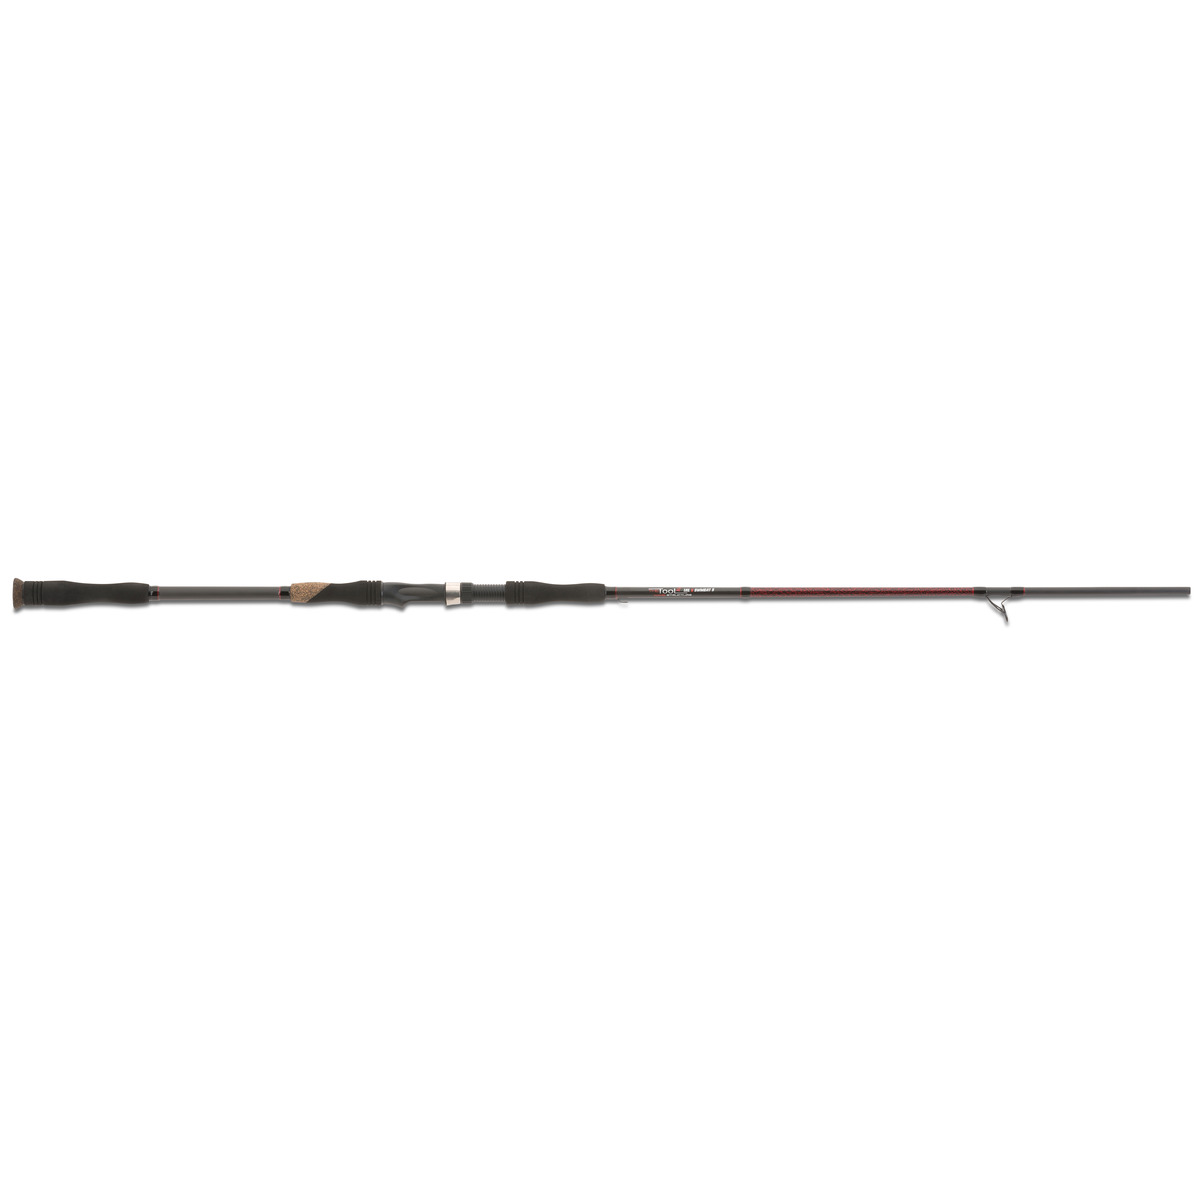 Iron Claw The Tool Ii - Tail&Swimbait S -165 g